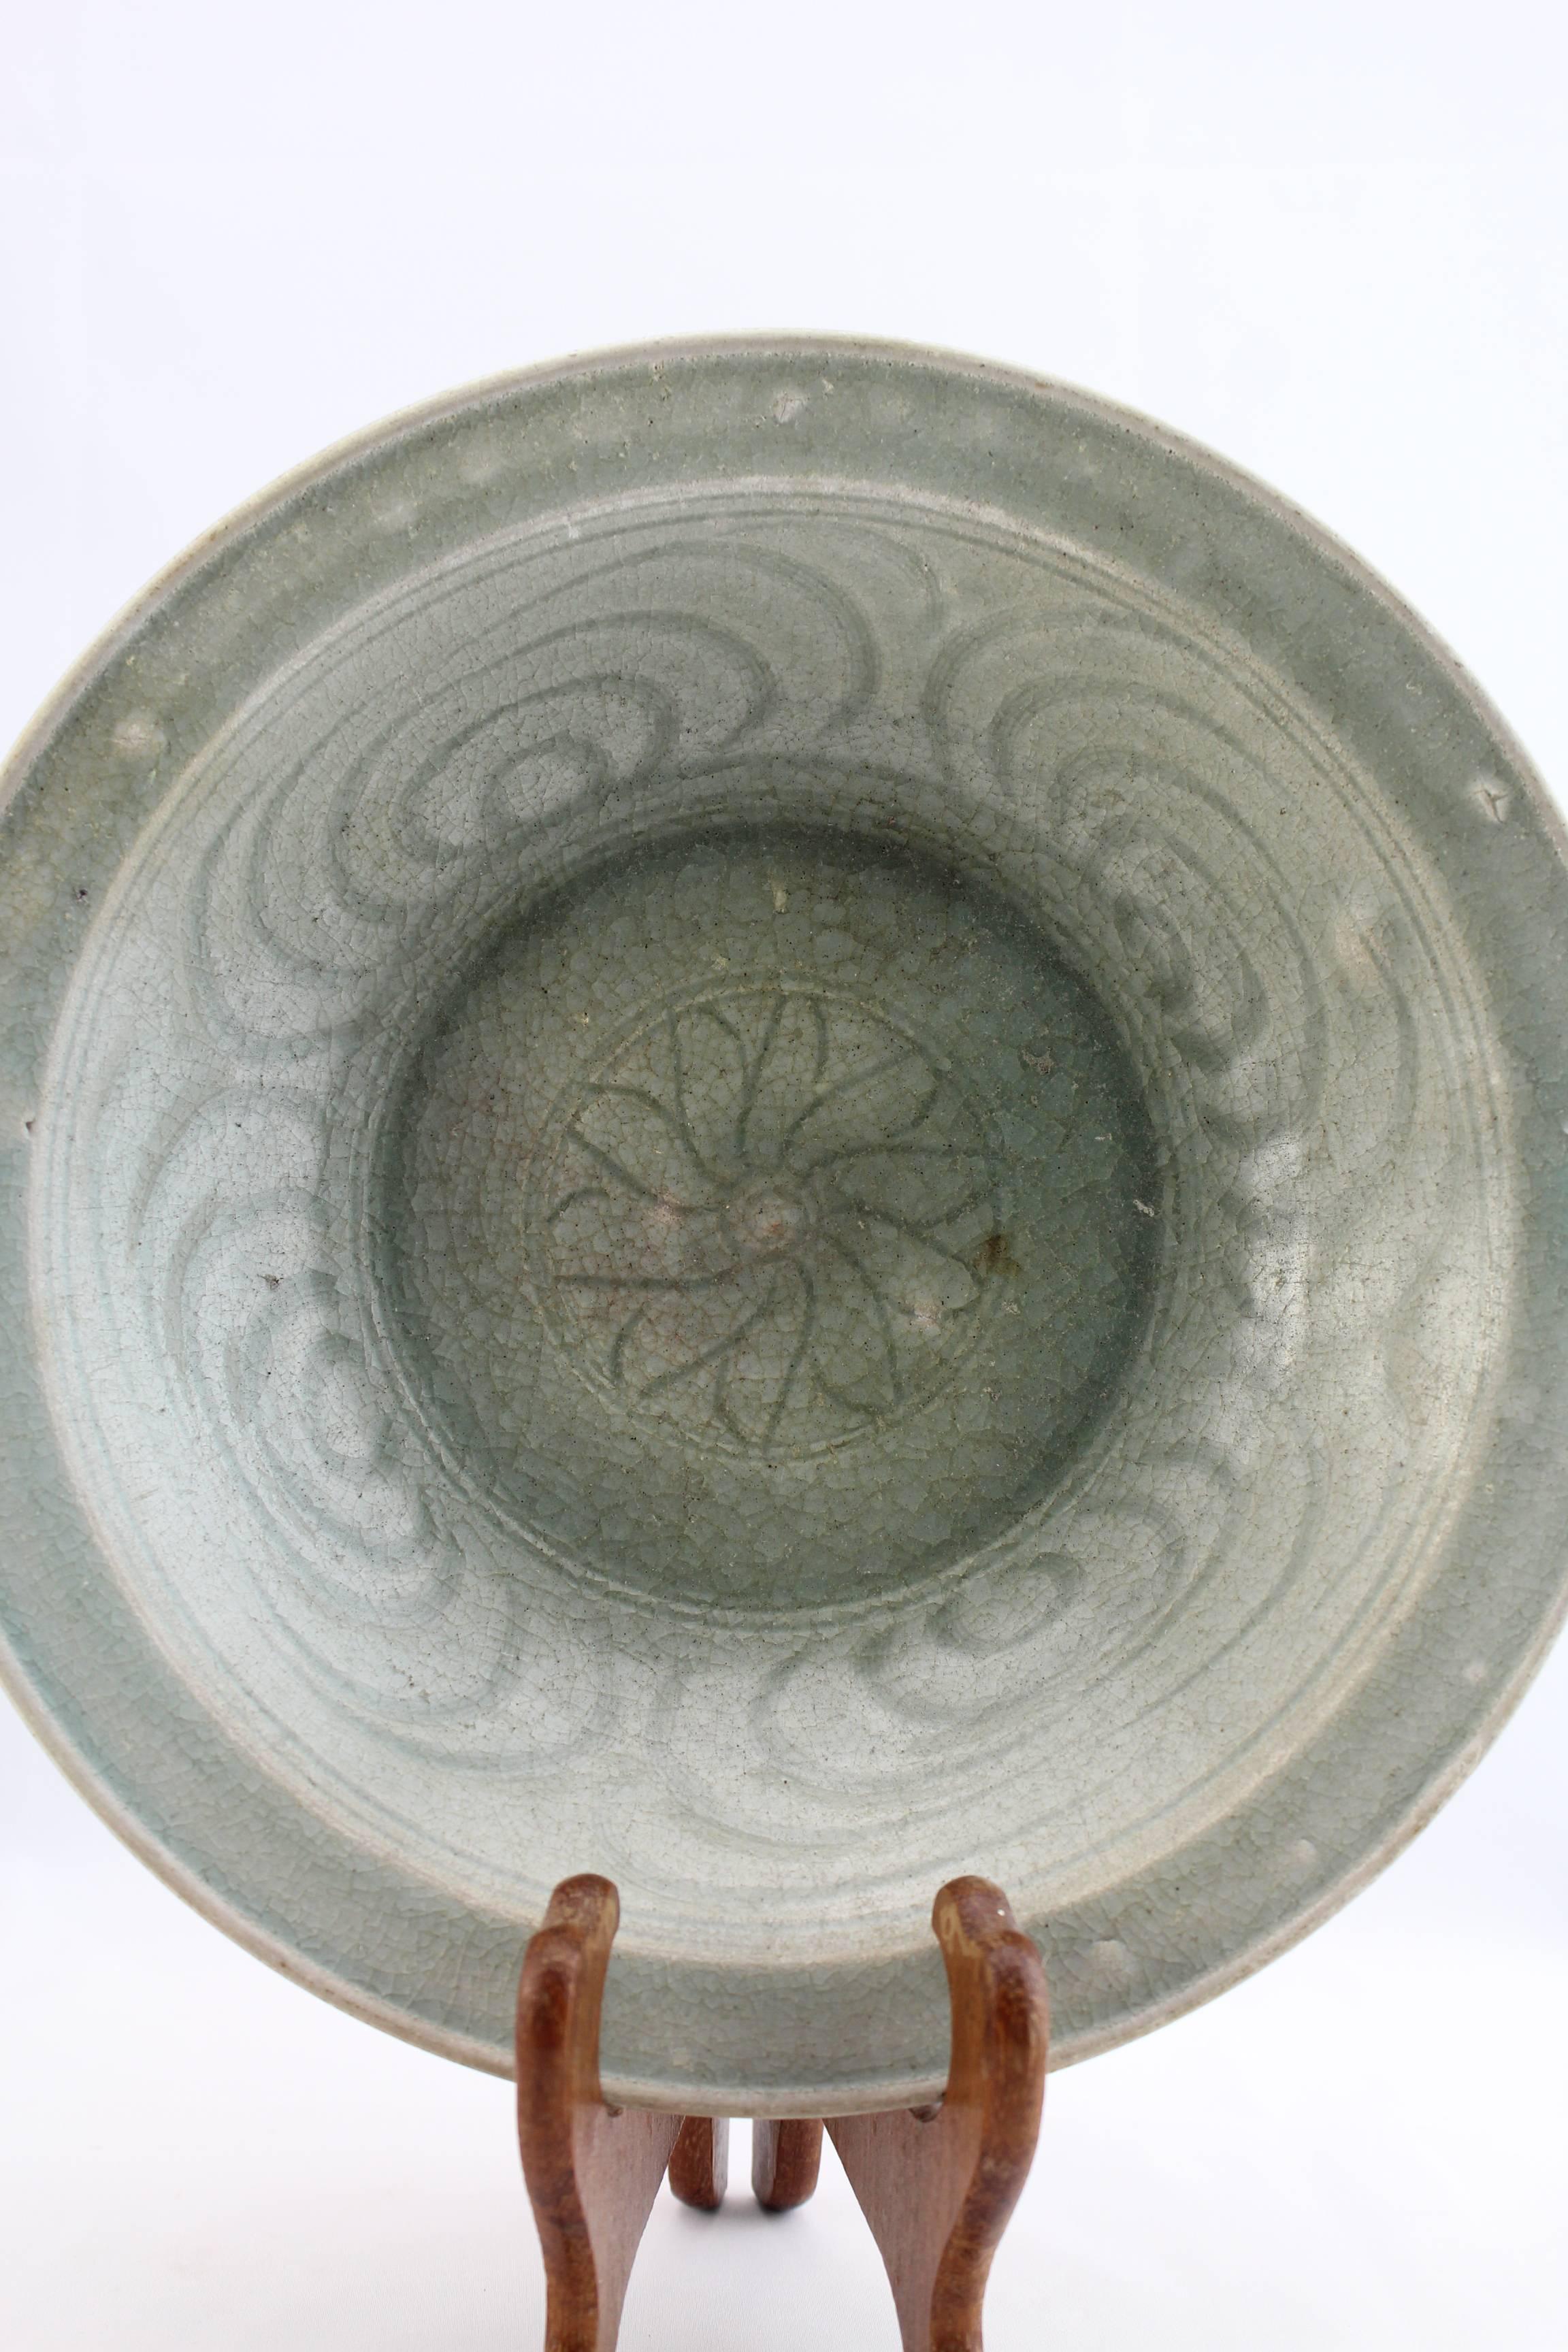 From Sukhothai or Sangkhalok (as named by the Chinese) this antique ceramic bowl is from the original kilns situated outside the wall of the ancient city. 

The production of ceramics began in the 13th century AD, possibly with the decline of